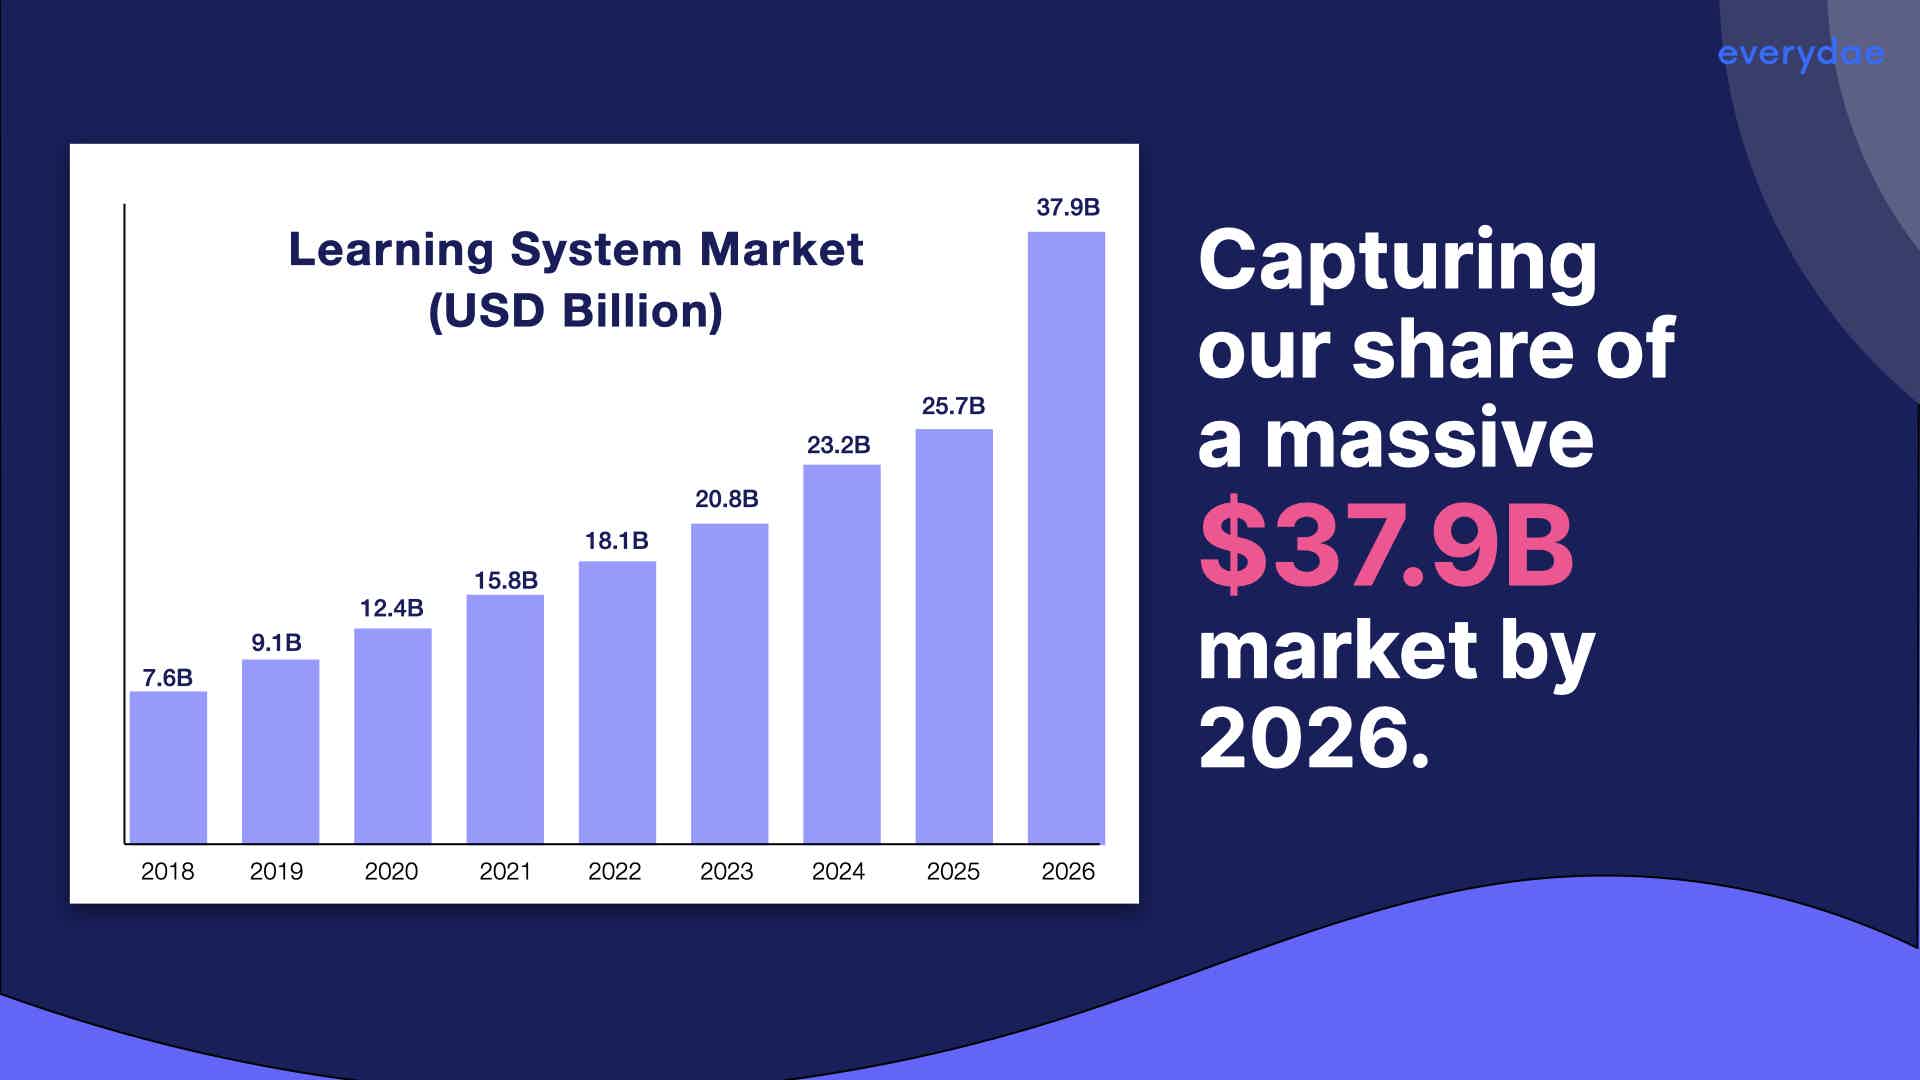 Growth in the Learning Systems Market - to $37.9B by 2026